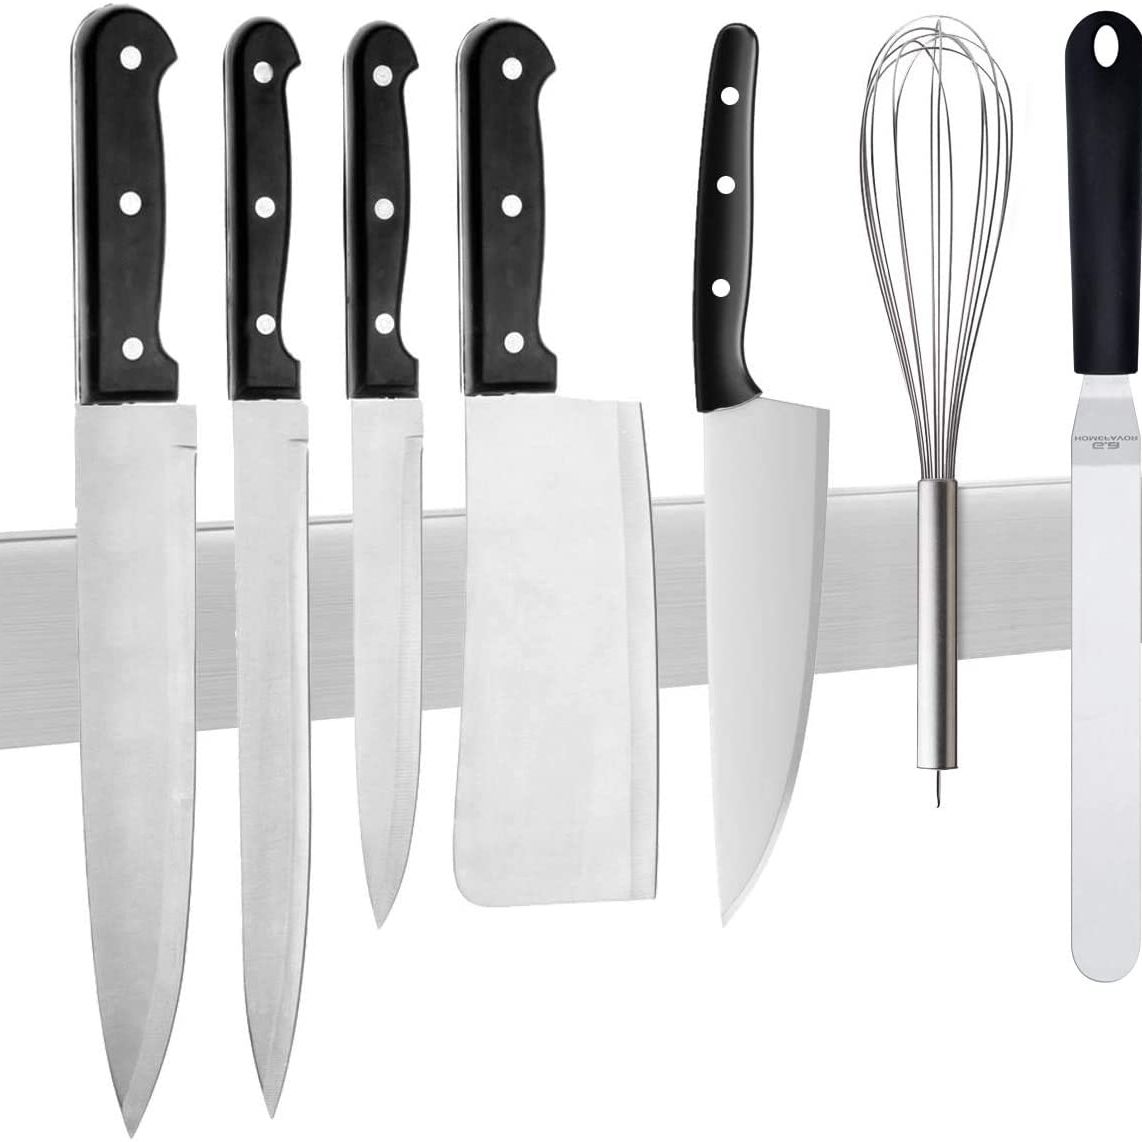 8 Best Knife Holders for 2021 - Top-Rated Knife Storage Blocks